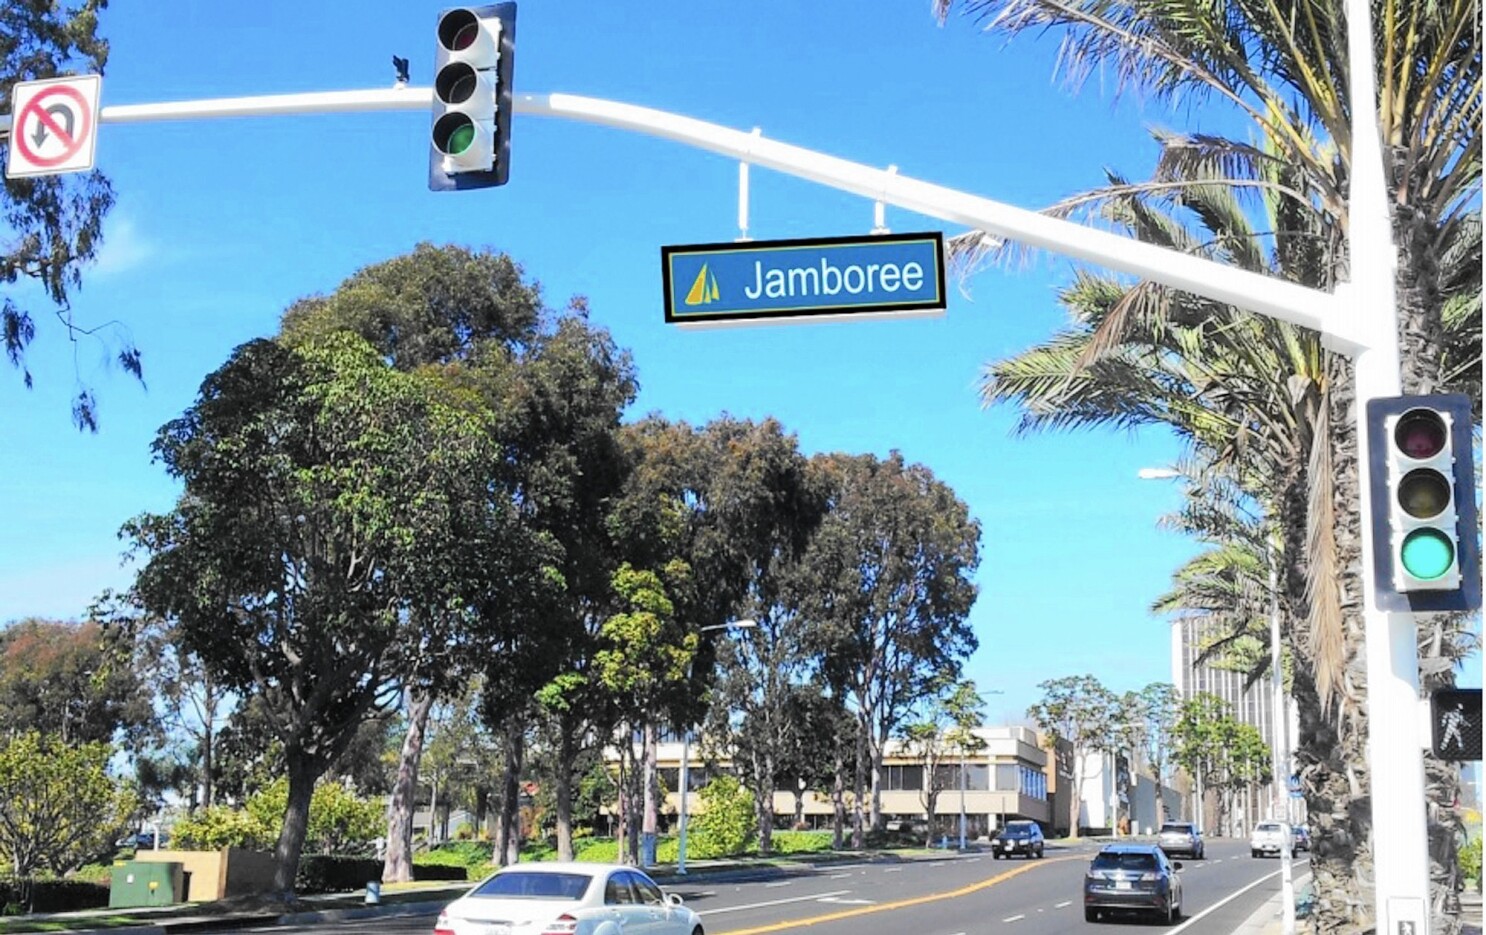 Newport Considers New Lighted Up Street Signs Bright Blue Gold And A Sail Los Angeles Times